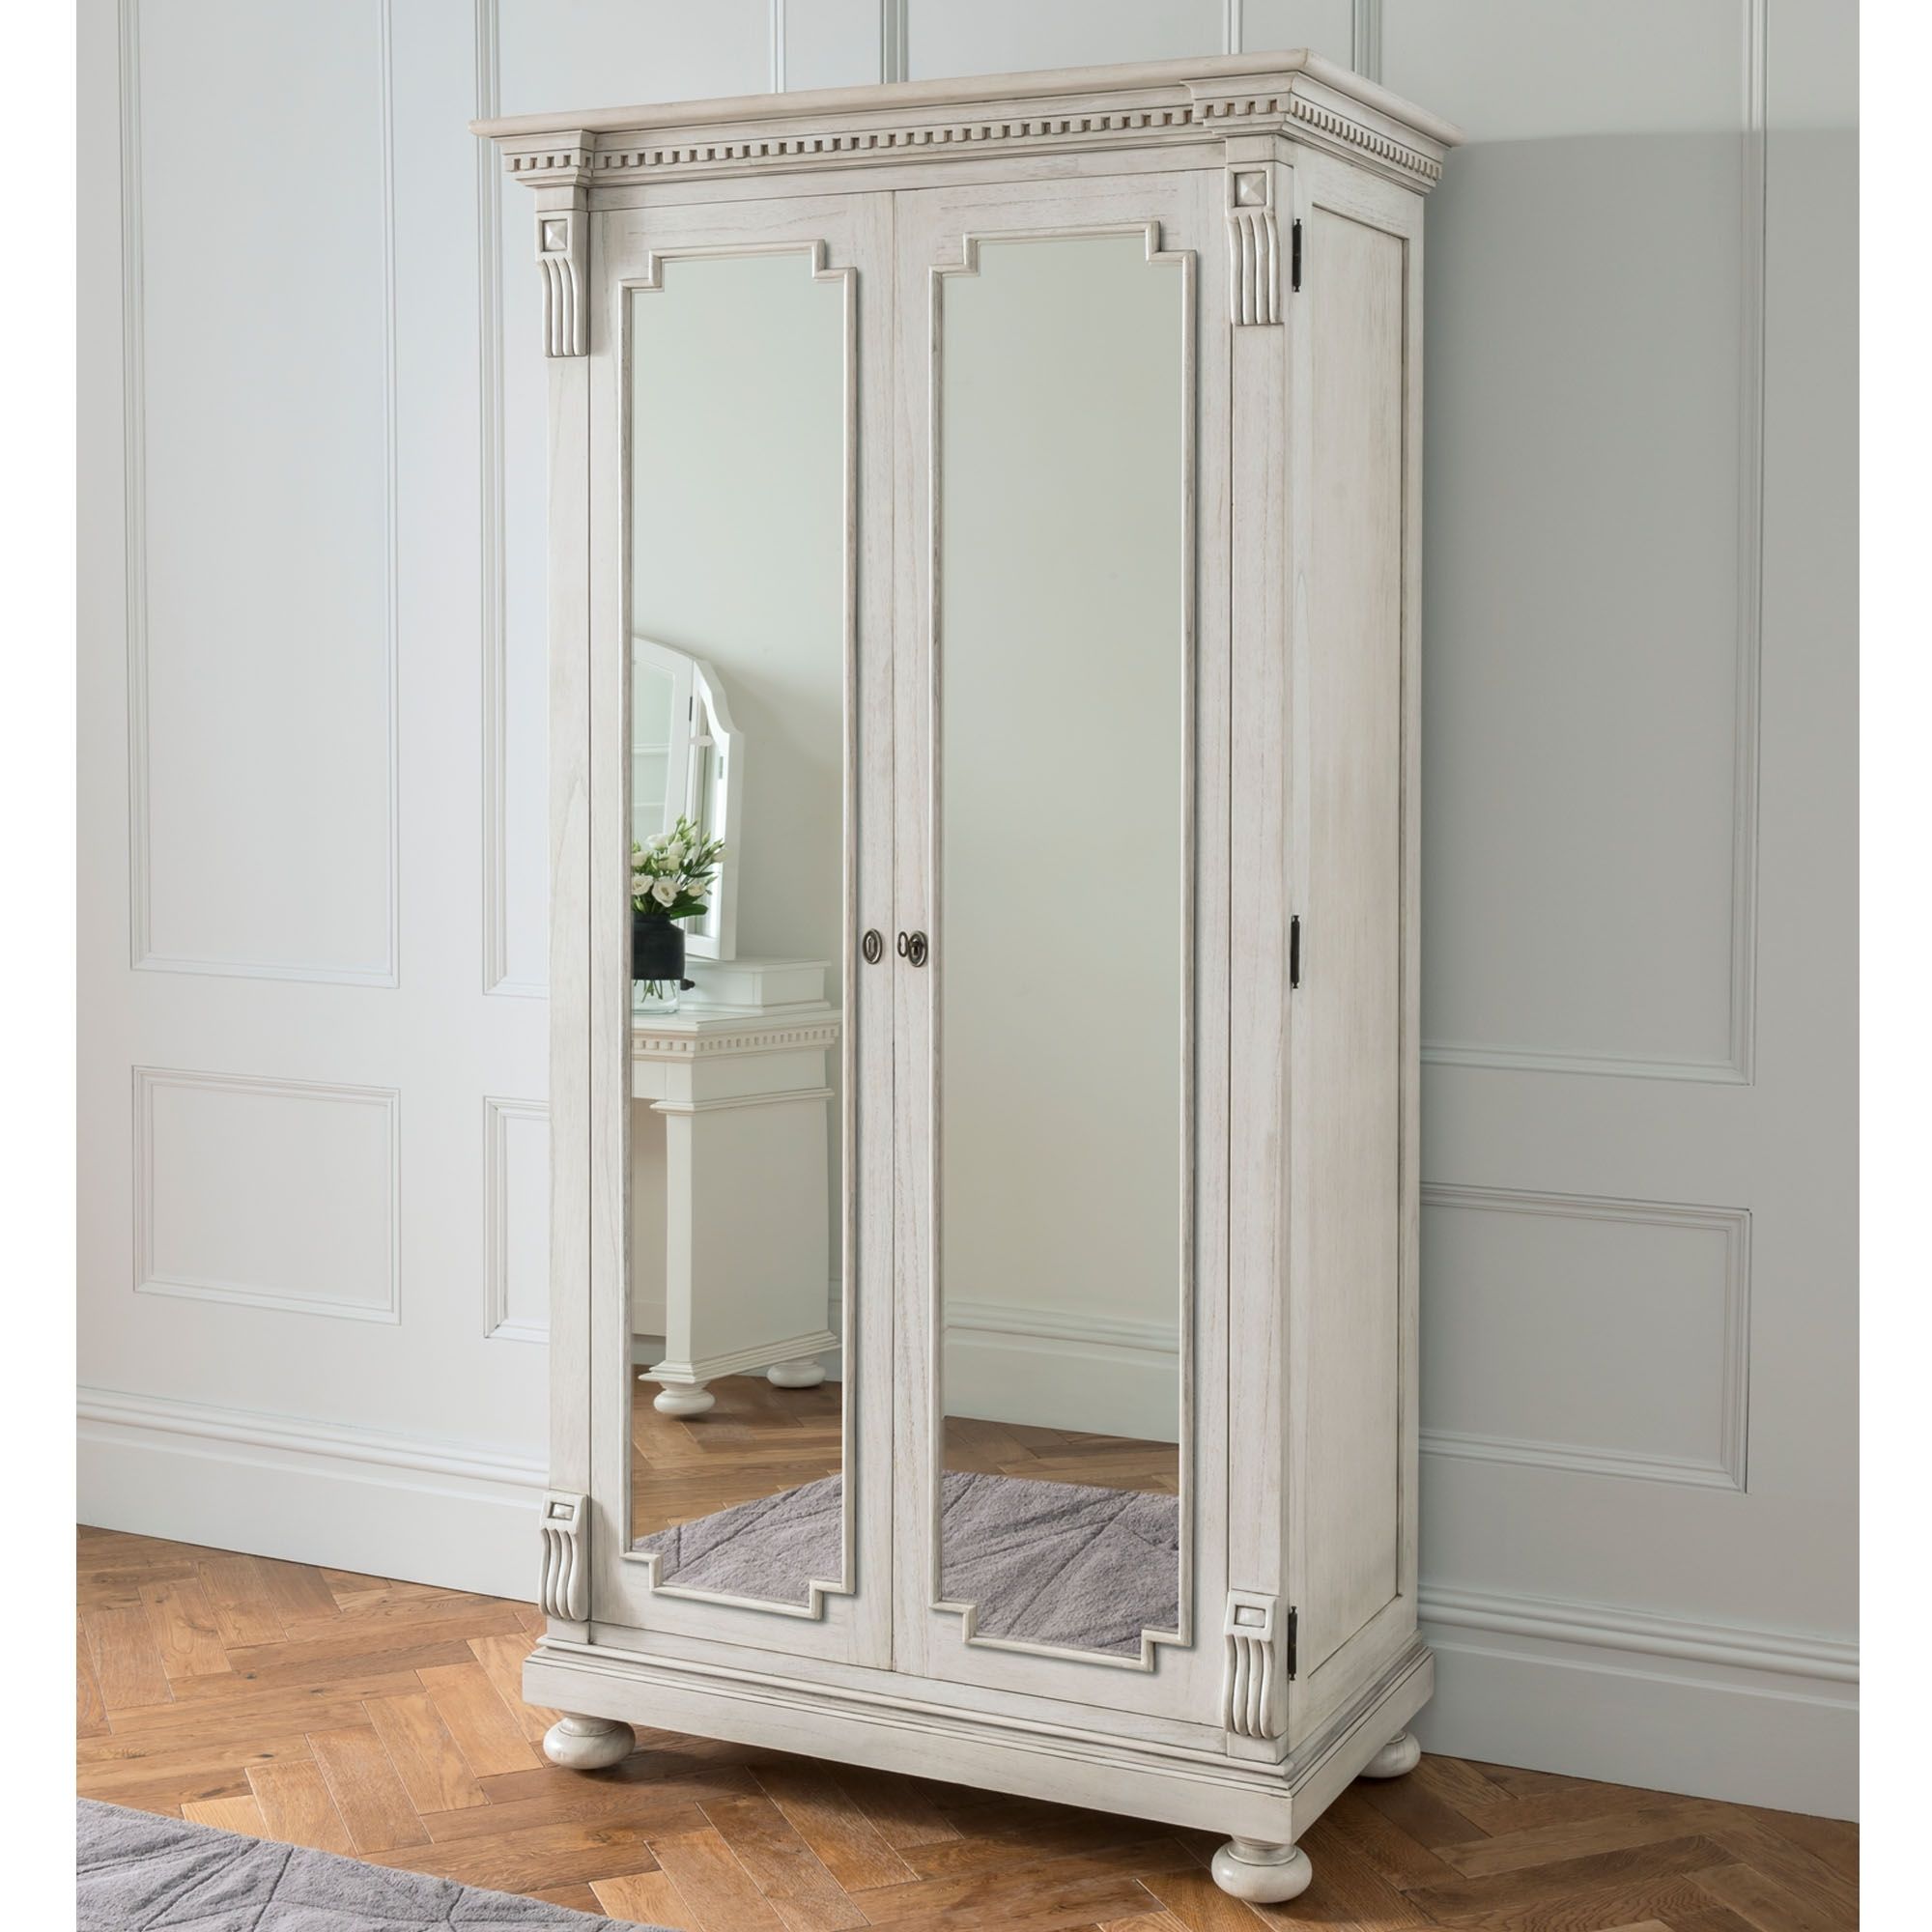 Bakersfield Grey Antique French Style Wardrobe | French Furniture Inside Vintage Style Wardrobes (View 13 of 15)